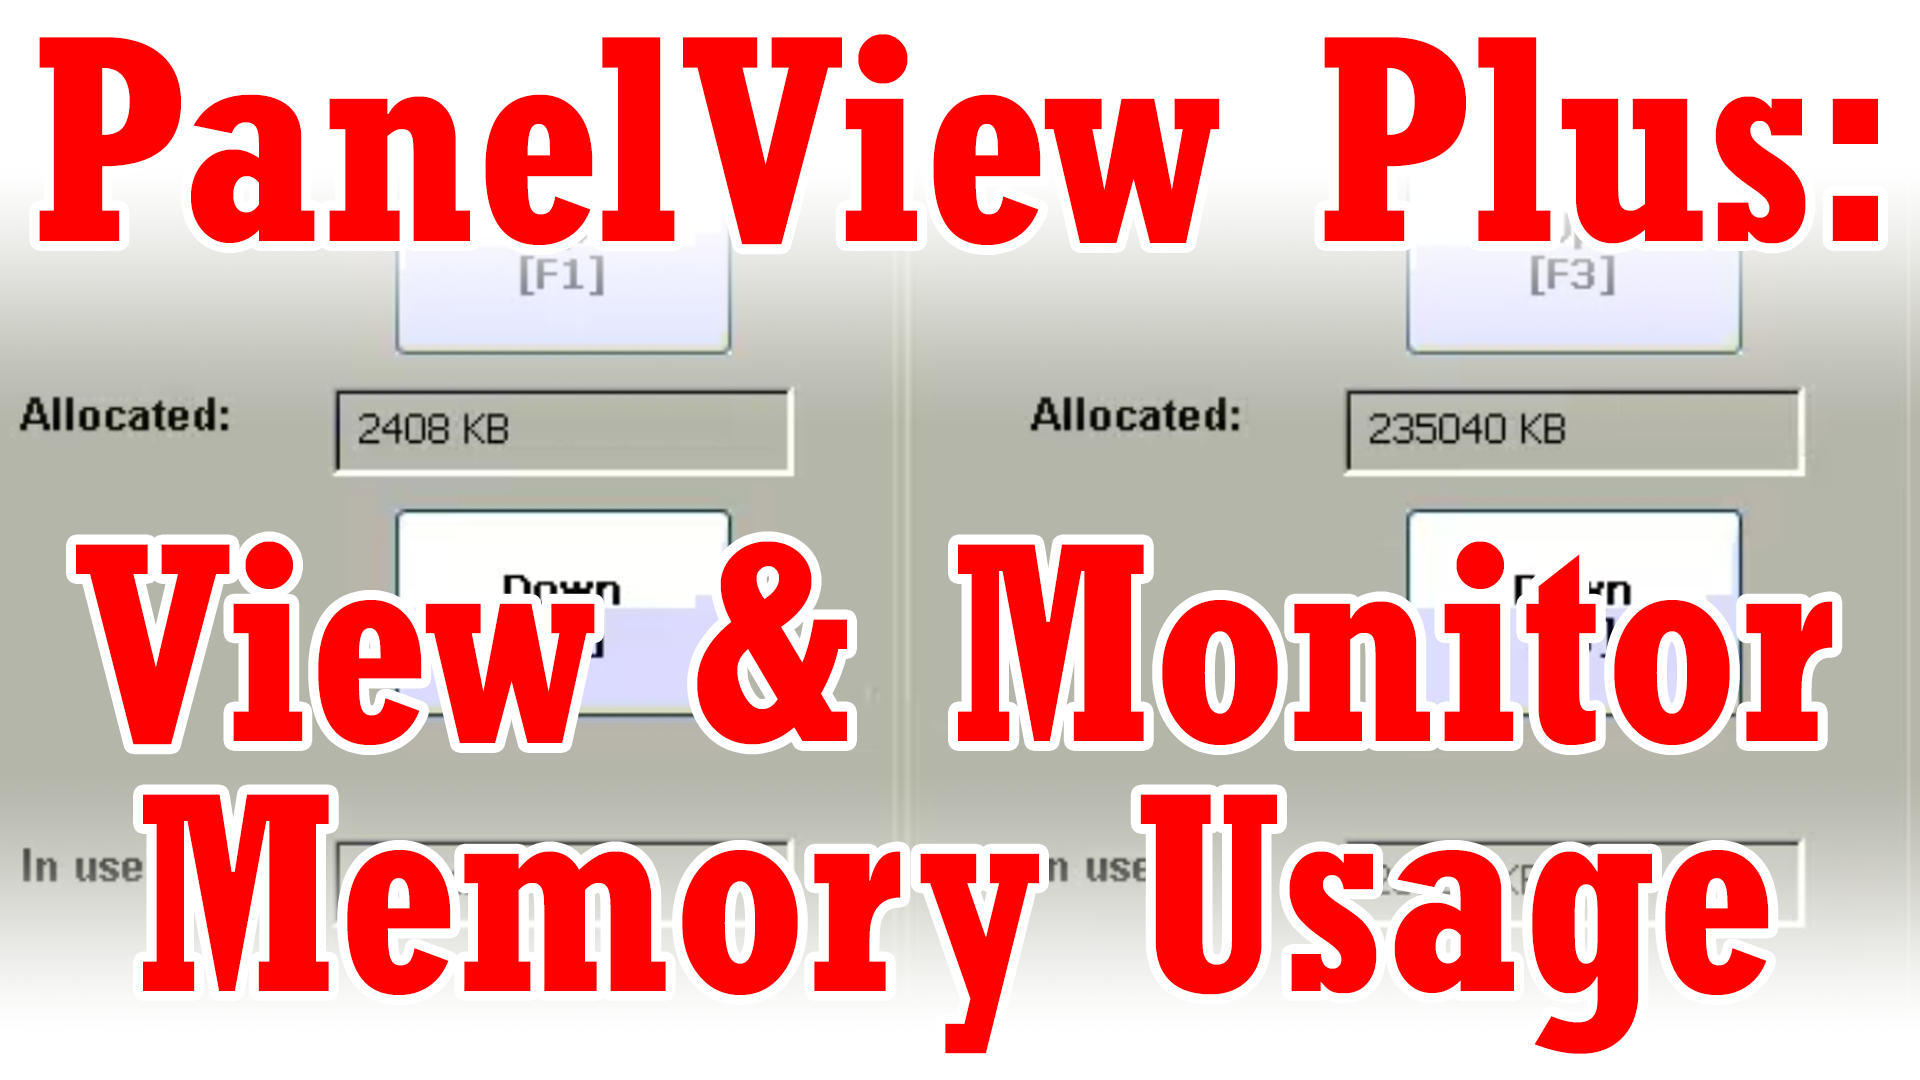 PanelView Plus - View and Monitor Memory Usage (M3E30)